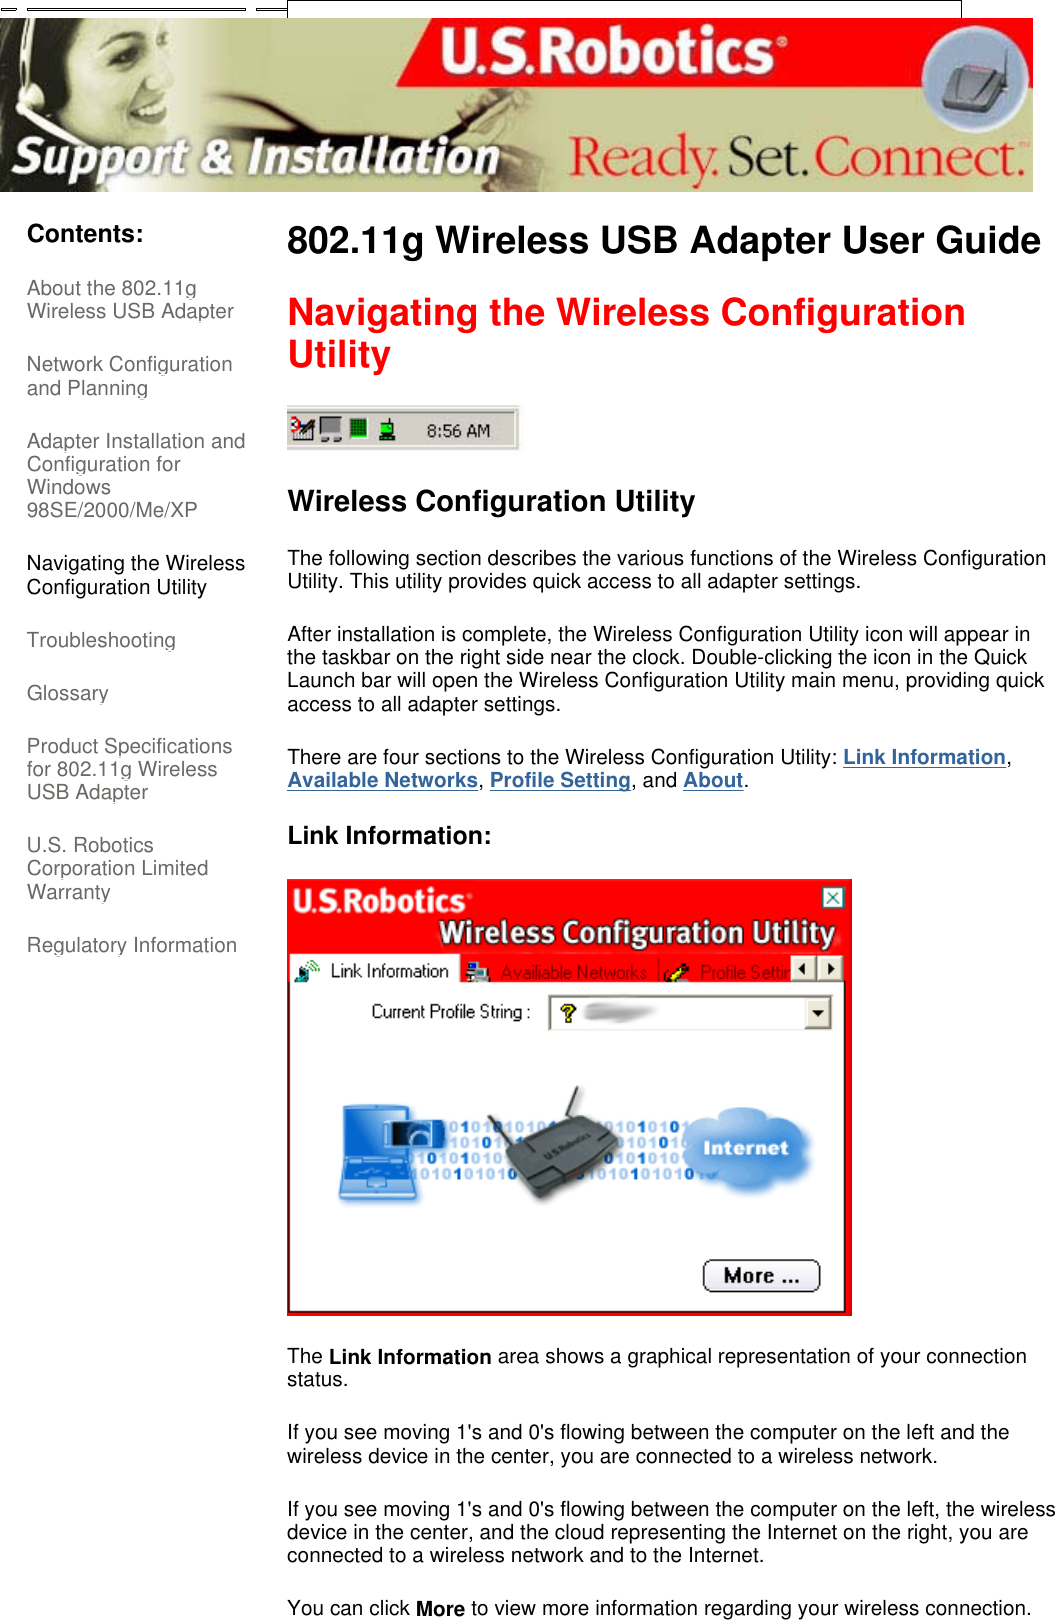      Contents: About the 802.11g Wireless USB Adapter  Network Configuration and Planning  Adapter Installation and Configuration for Windows 98SE/2000/Me/XP  Navigating the Wireless Configuration Utility Troubleshooting  Glossary  Product Specifications for 802.11g Wireless USB Adapter  U.S. Robotics Corporation Limited Warranty  Regulatory Information 802.11g Wireless USB Adapter User Guide  Navigating the Wireless Configuration Utility  Wireless Configuration Utility The following section describes the various functions of the Wireless Configuration Utility. This utility provides quick access to all adapter settings.  After installation is complete, the Wireless Configuration Utility icon will appear in the taskbar on the right side near the clock. Double-clicking the icon in the Quick Launch bar will open the Wireless Configuration Utility main menu, providing quick access to all adapter settings.  There are four sections to the Wireless Configuration Utility: Link Information, Available Networks, Profile Setting, and About.  Link Information:   The Link Information area shows a graphical representation of your connection status. If you see moving 1&apos;s and 0&apos;s flowing between the computer on the left and the wireless device in the center, you are connected to a wireless network. If you see moving 1&apos;s and 0&apos;s flowing between the computer on the left, the wireless device in the center, and the cloud representing the Internet on the right, you are connected to a wireless network and to the Internet. You can click More to view more information regarding your wireless connection. 